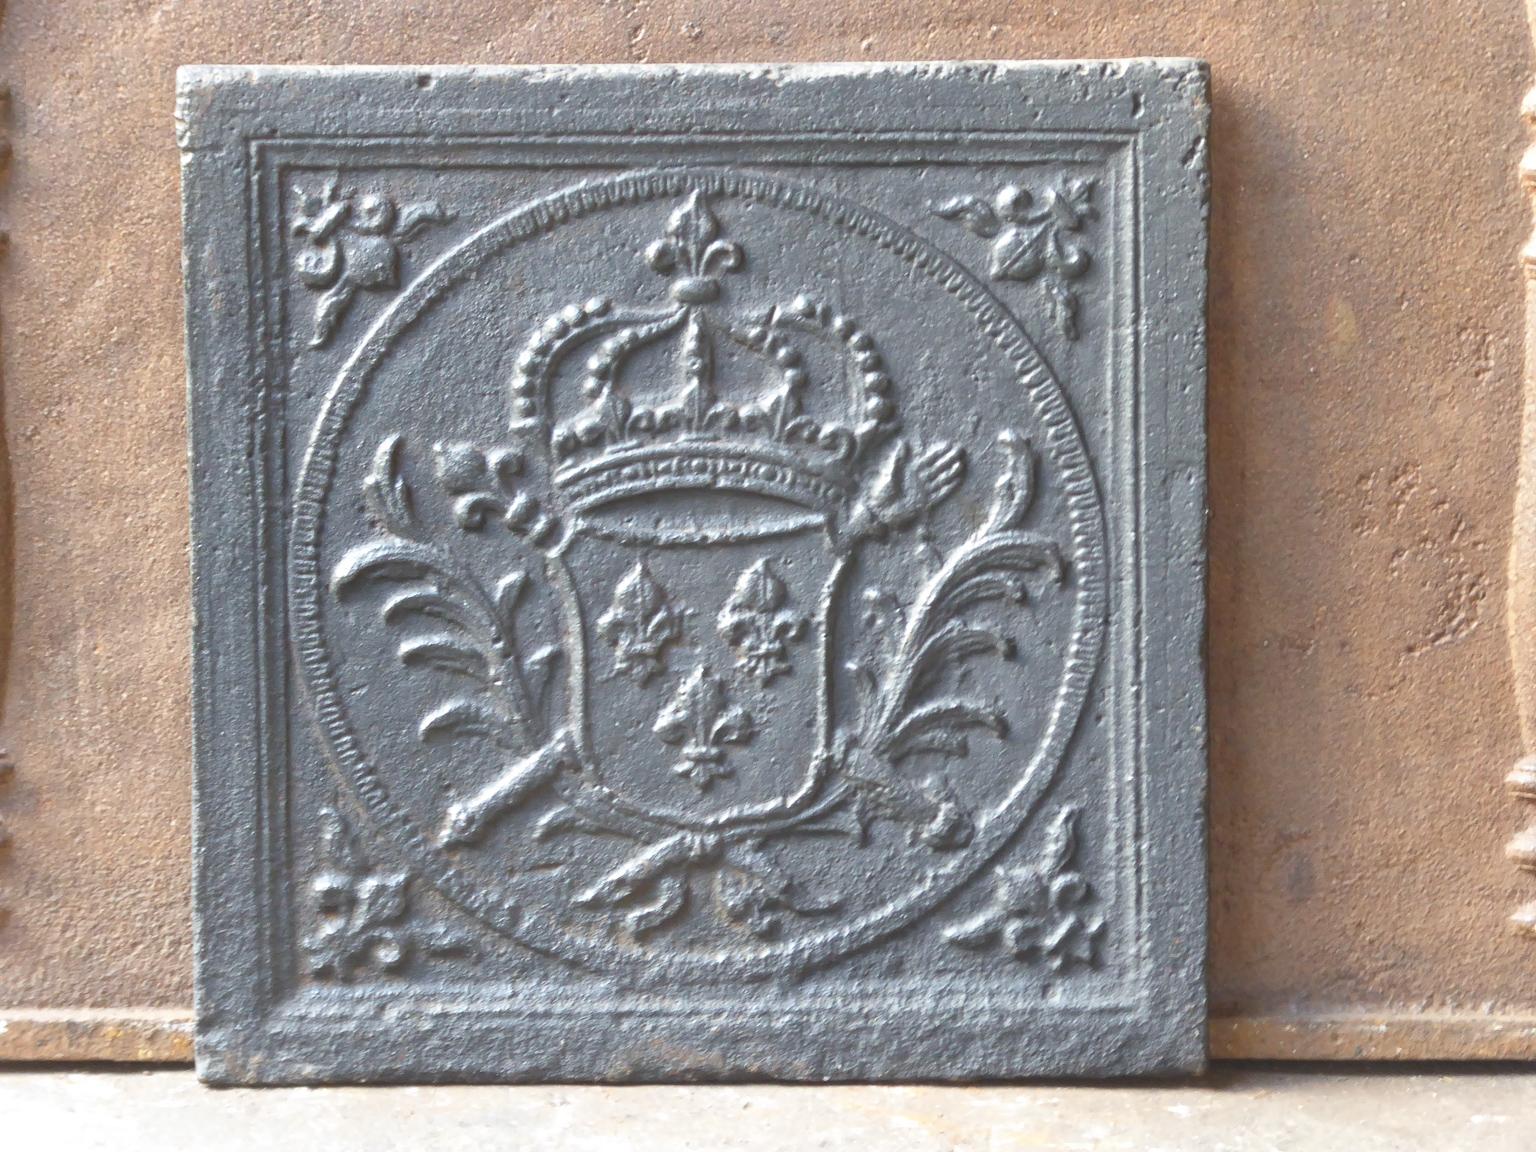 18th century French Louis XV fireback with the Arms of France. This is the coat of arms of the House of Bourbon, an originally French royal house that became a major dynasty in Europe. It delivered kings for Spain (Navarra), France, both Sicilies